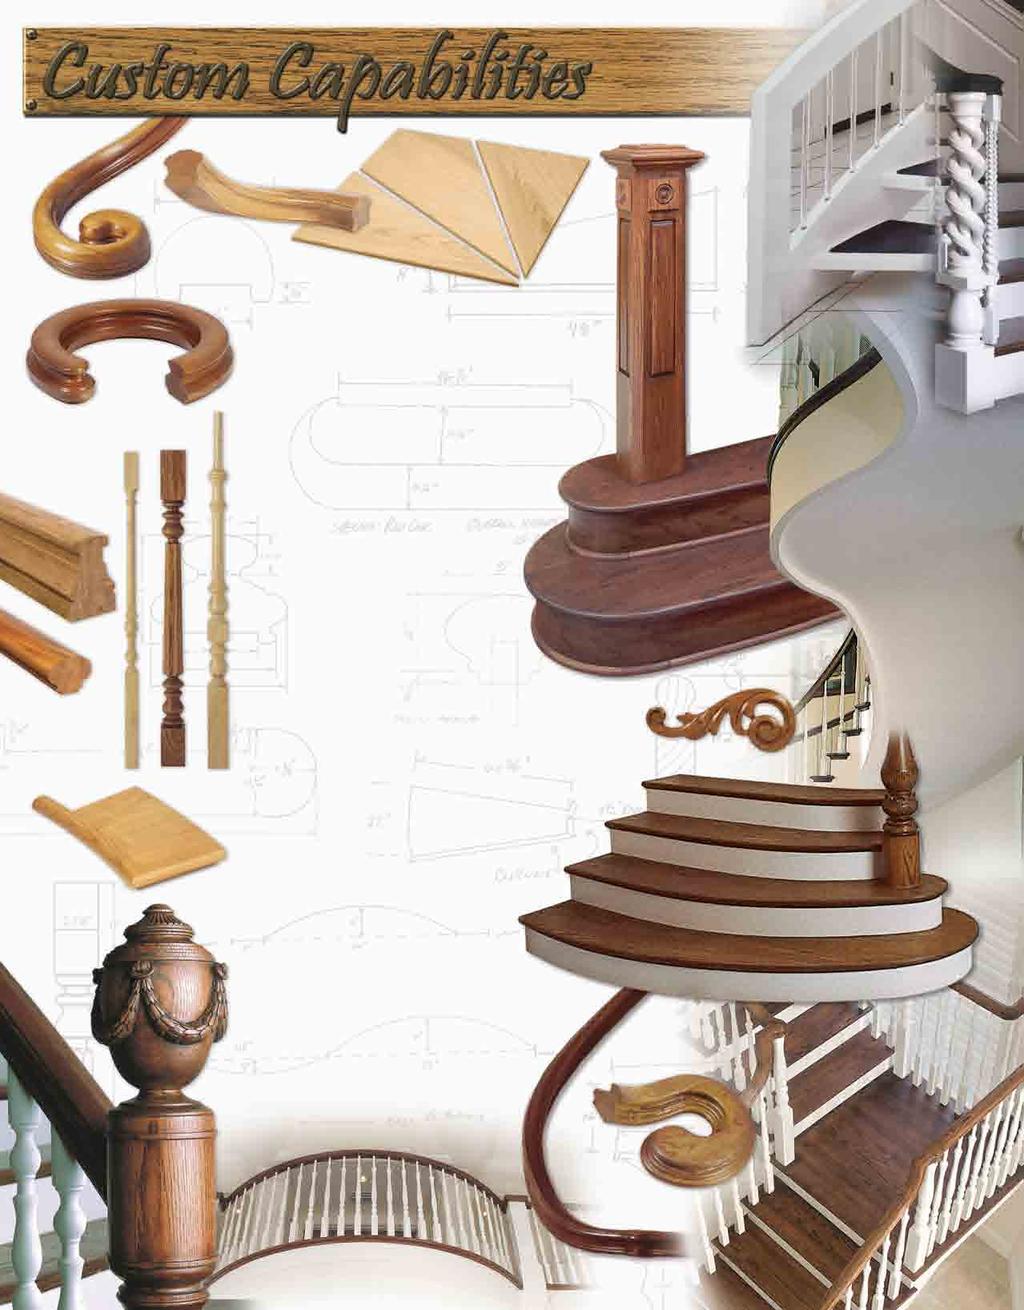 13 11 2 26 17 26 8 18 1 1 Carved Turnings 2 Acrylic Balusters 3 Stacked Starting Steps 4 Bowed Starting Steps